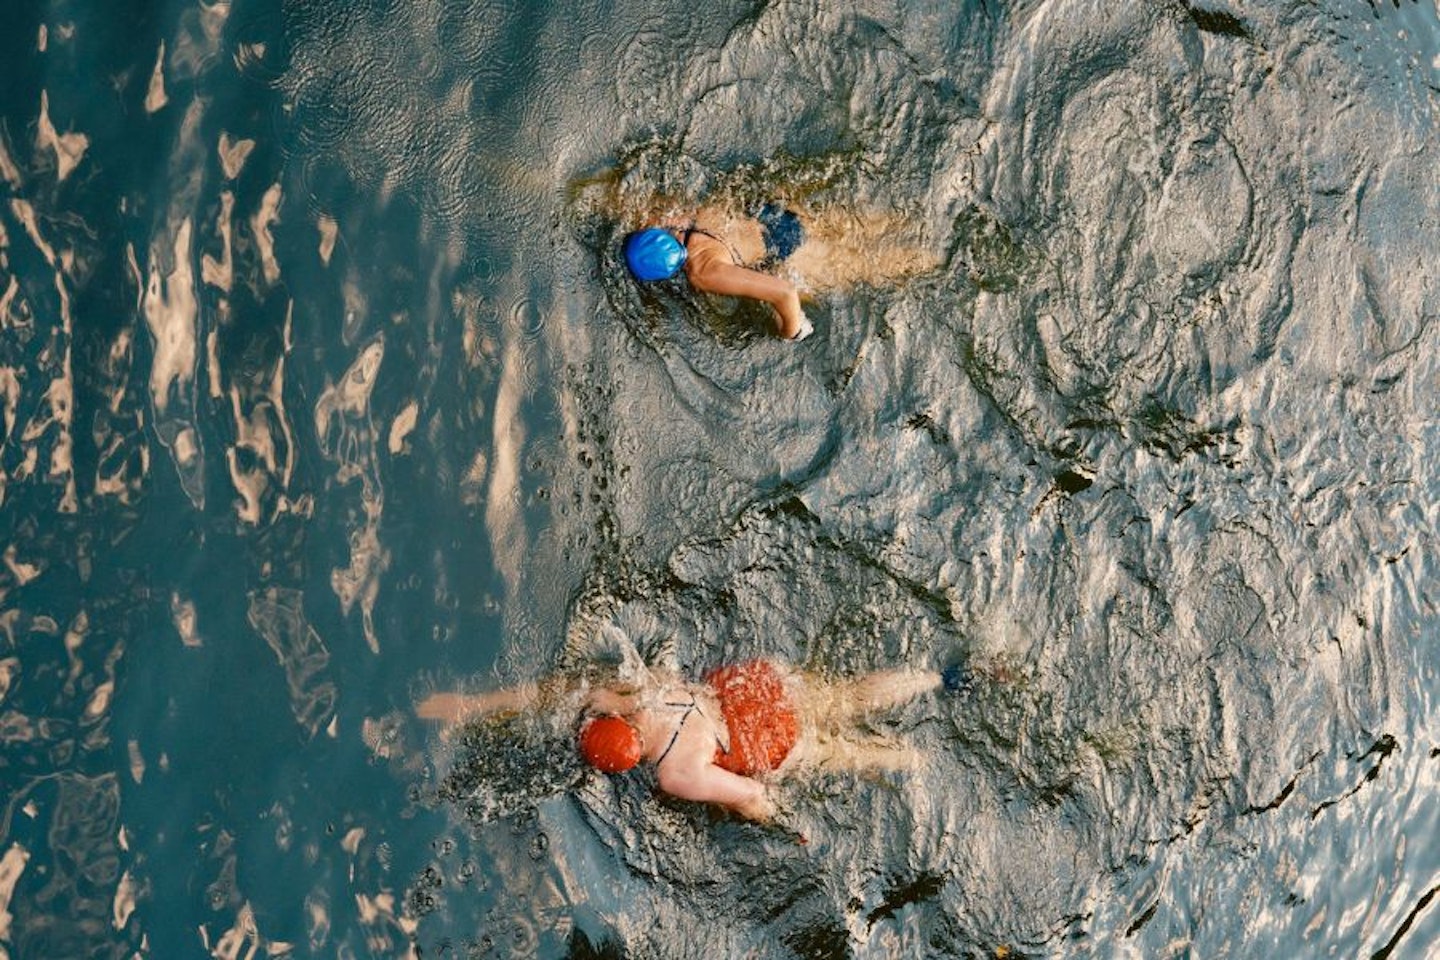 Two people open water swimming